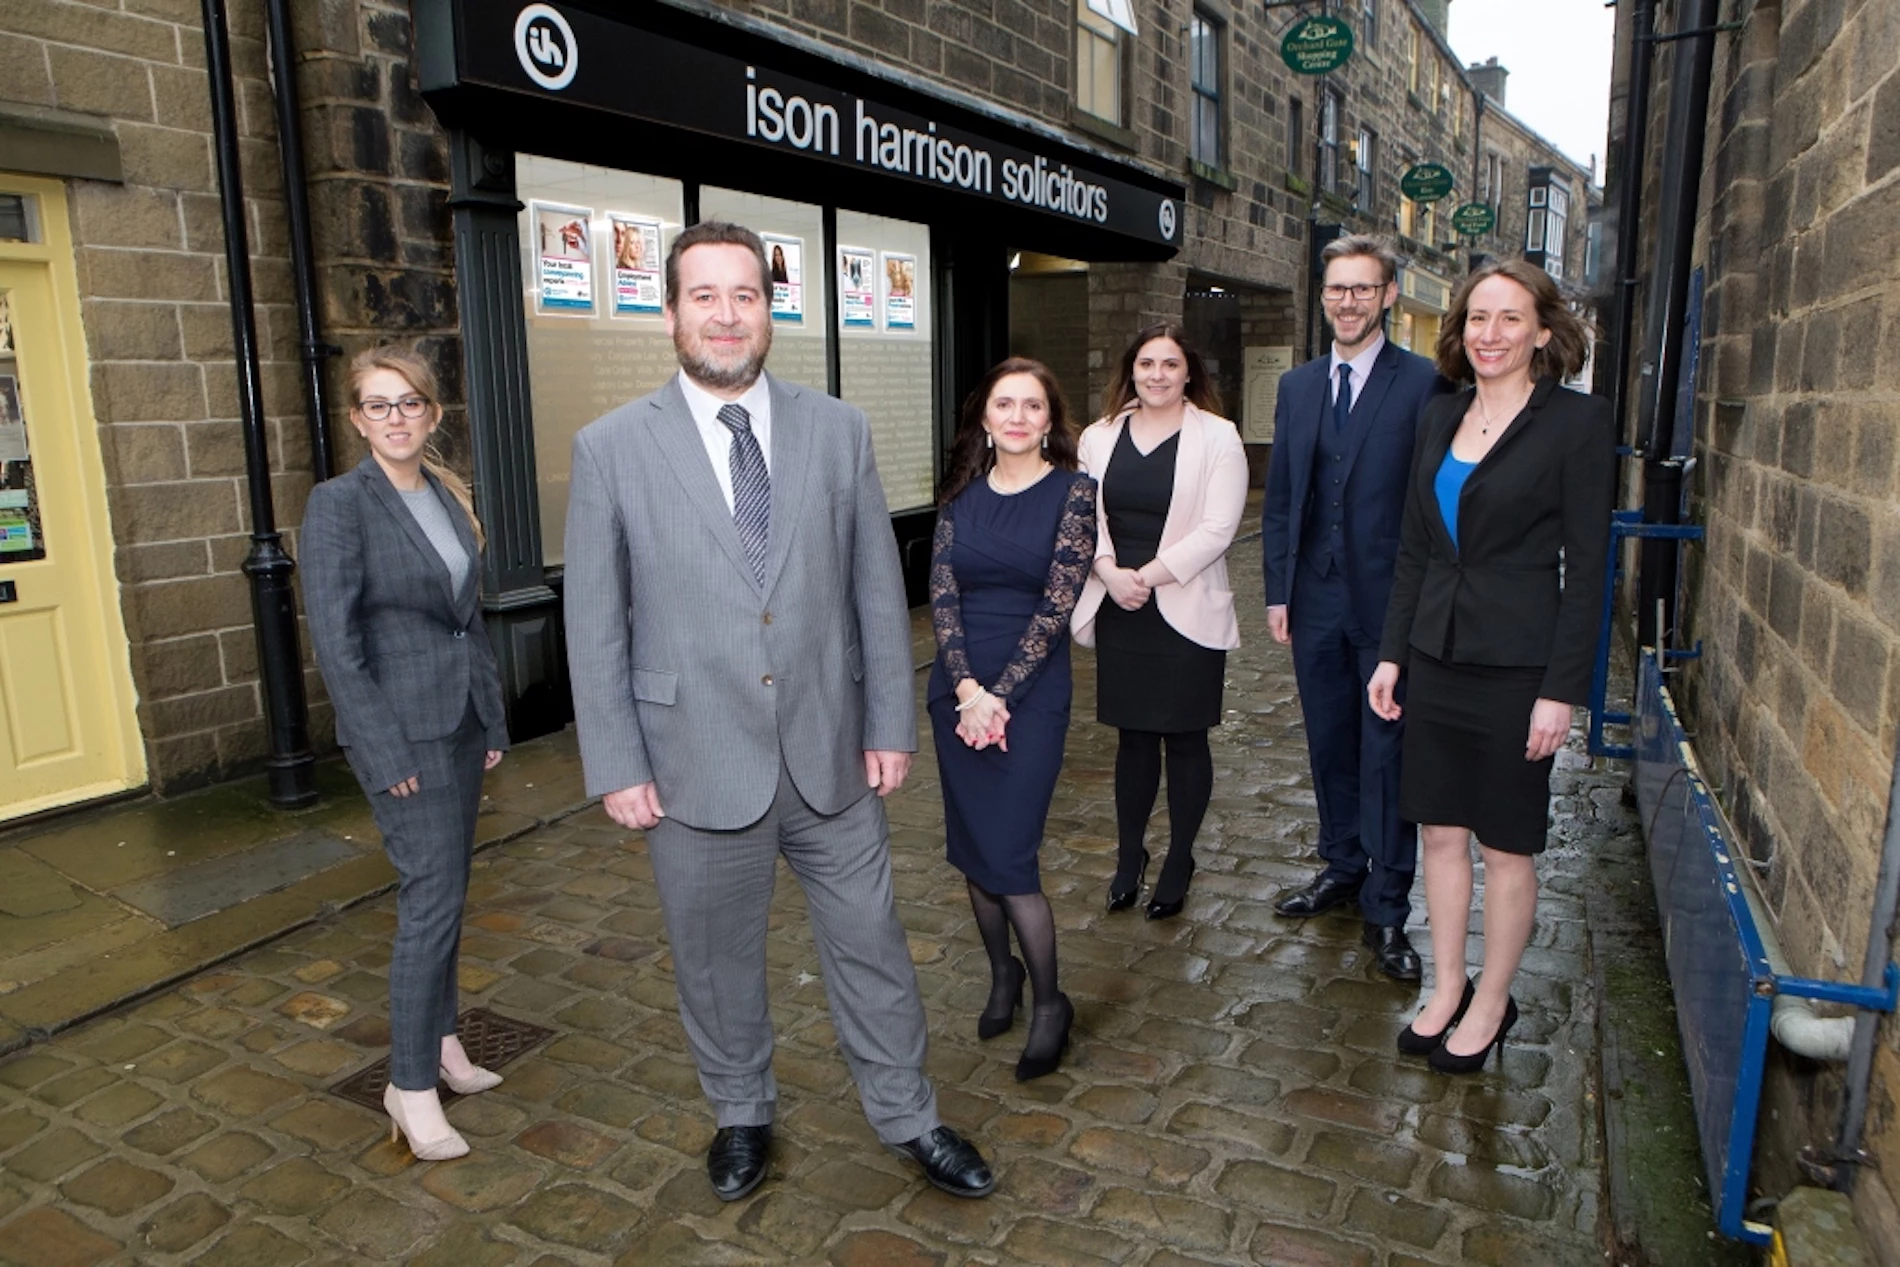 Ison Harrison partner Nigel Cowley (front) and the team at the new Otley office with managing partner Jonathan Wearing (second from right)